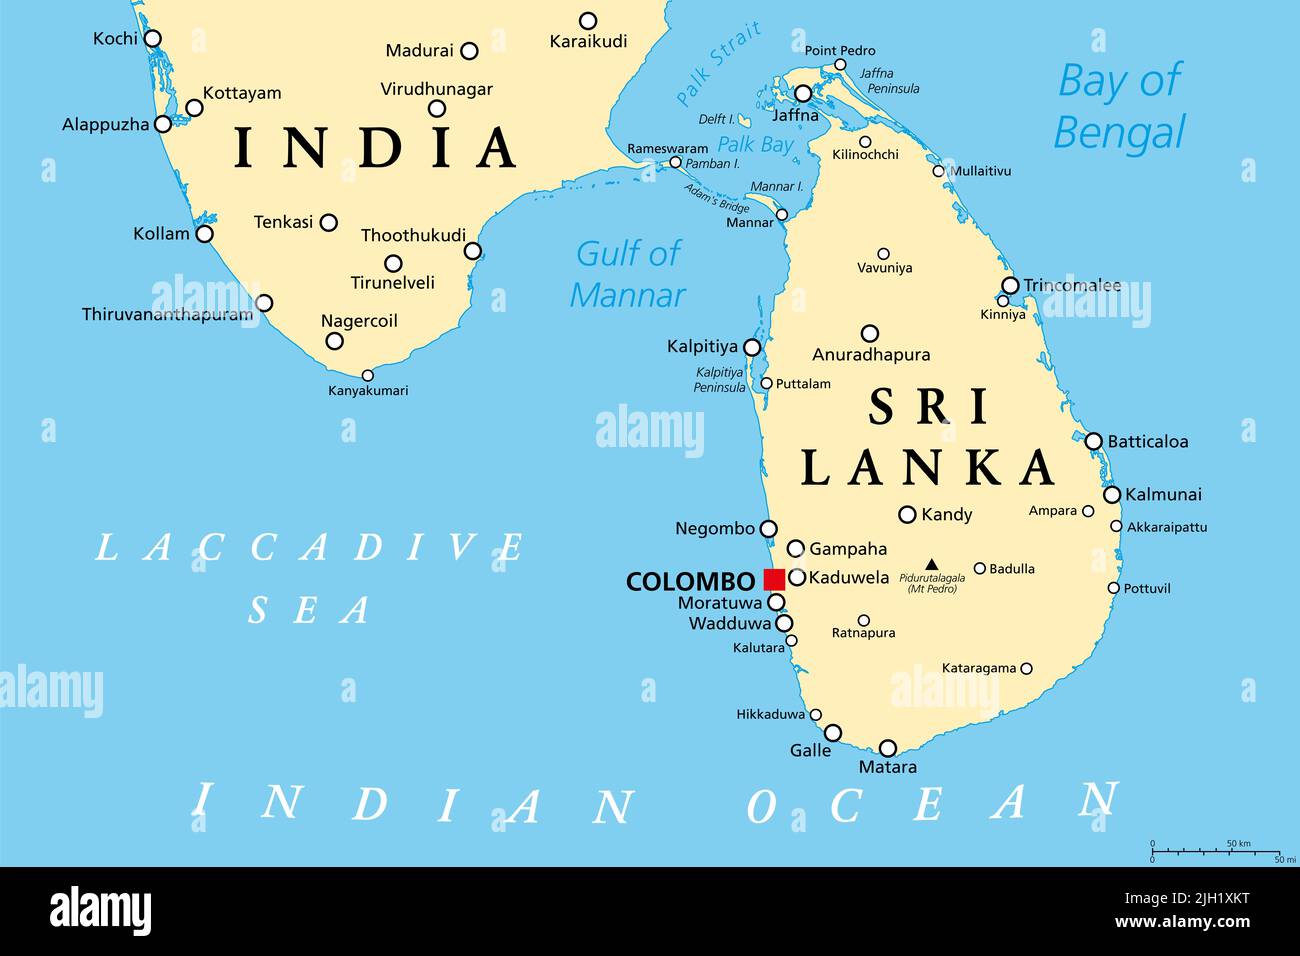 Sri Lanka and part of Southern India, political map. Democratic Socialist Republic of Sri Lanka, formerly Ceylon, island country in South Asia. Stock Photo